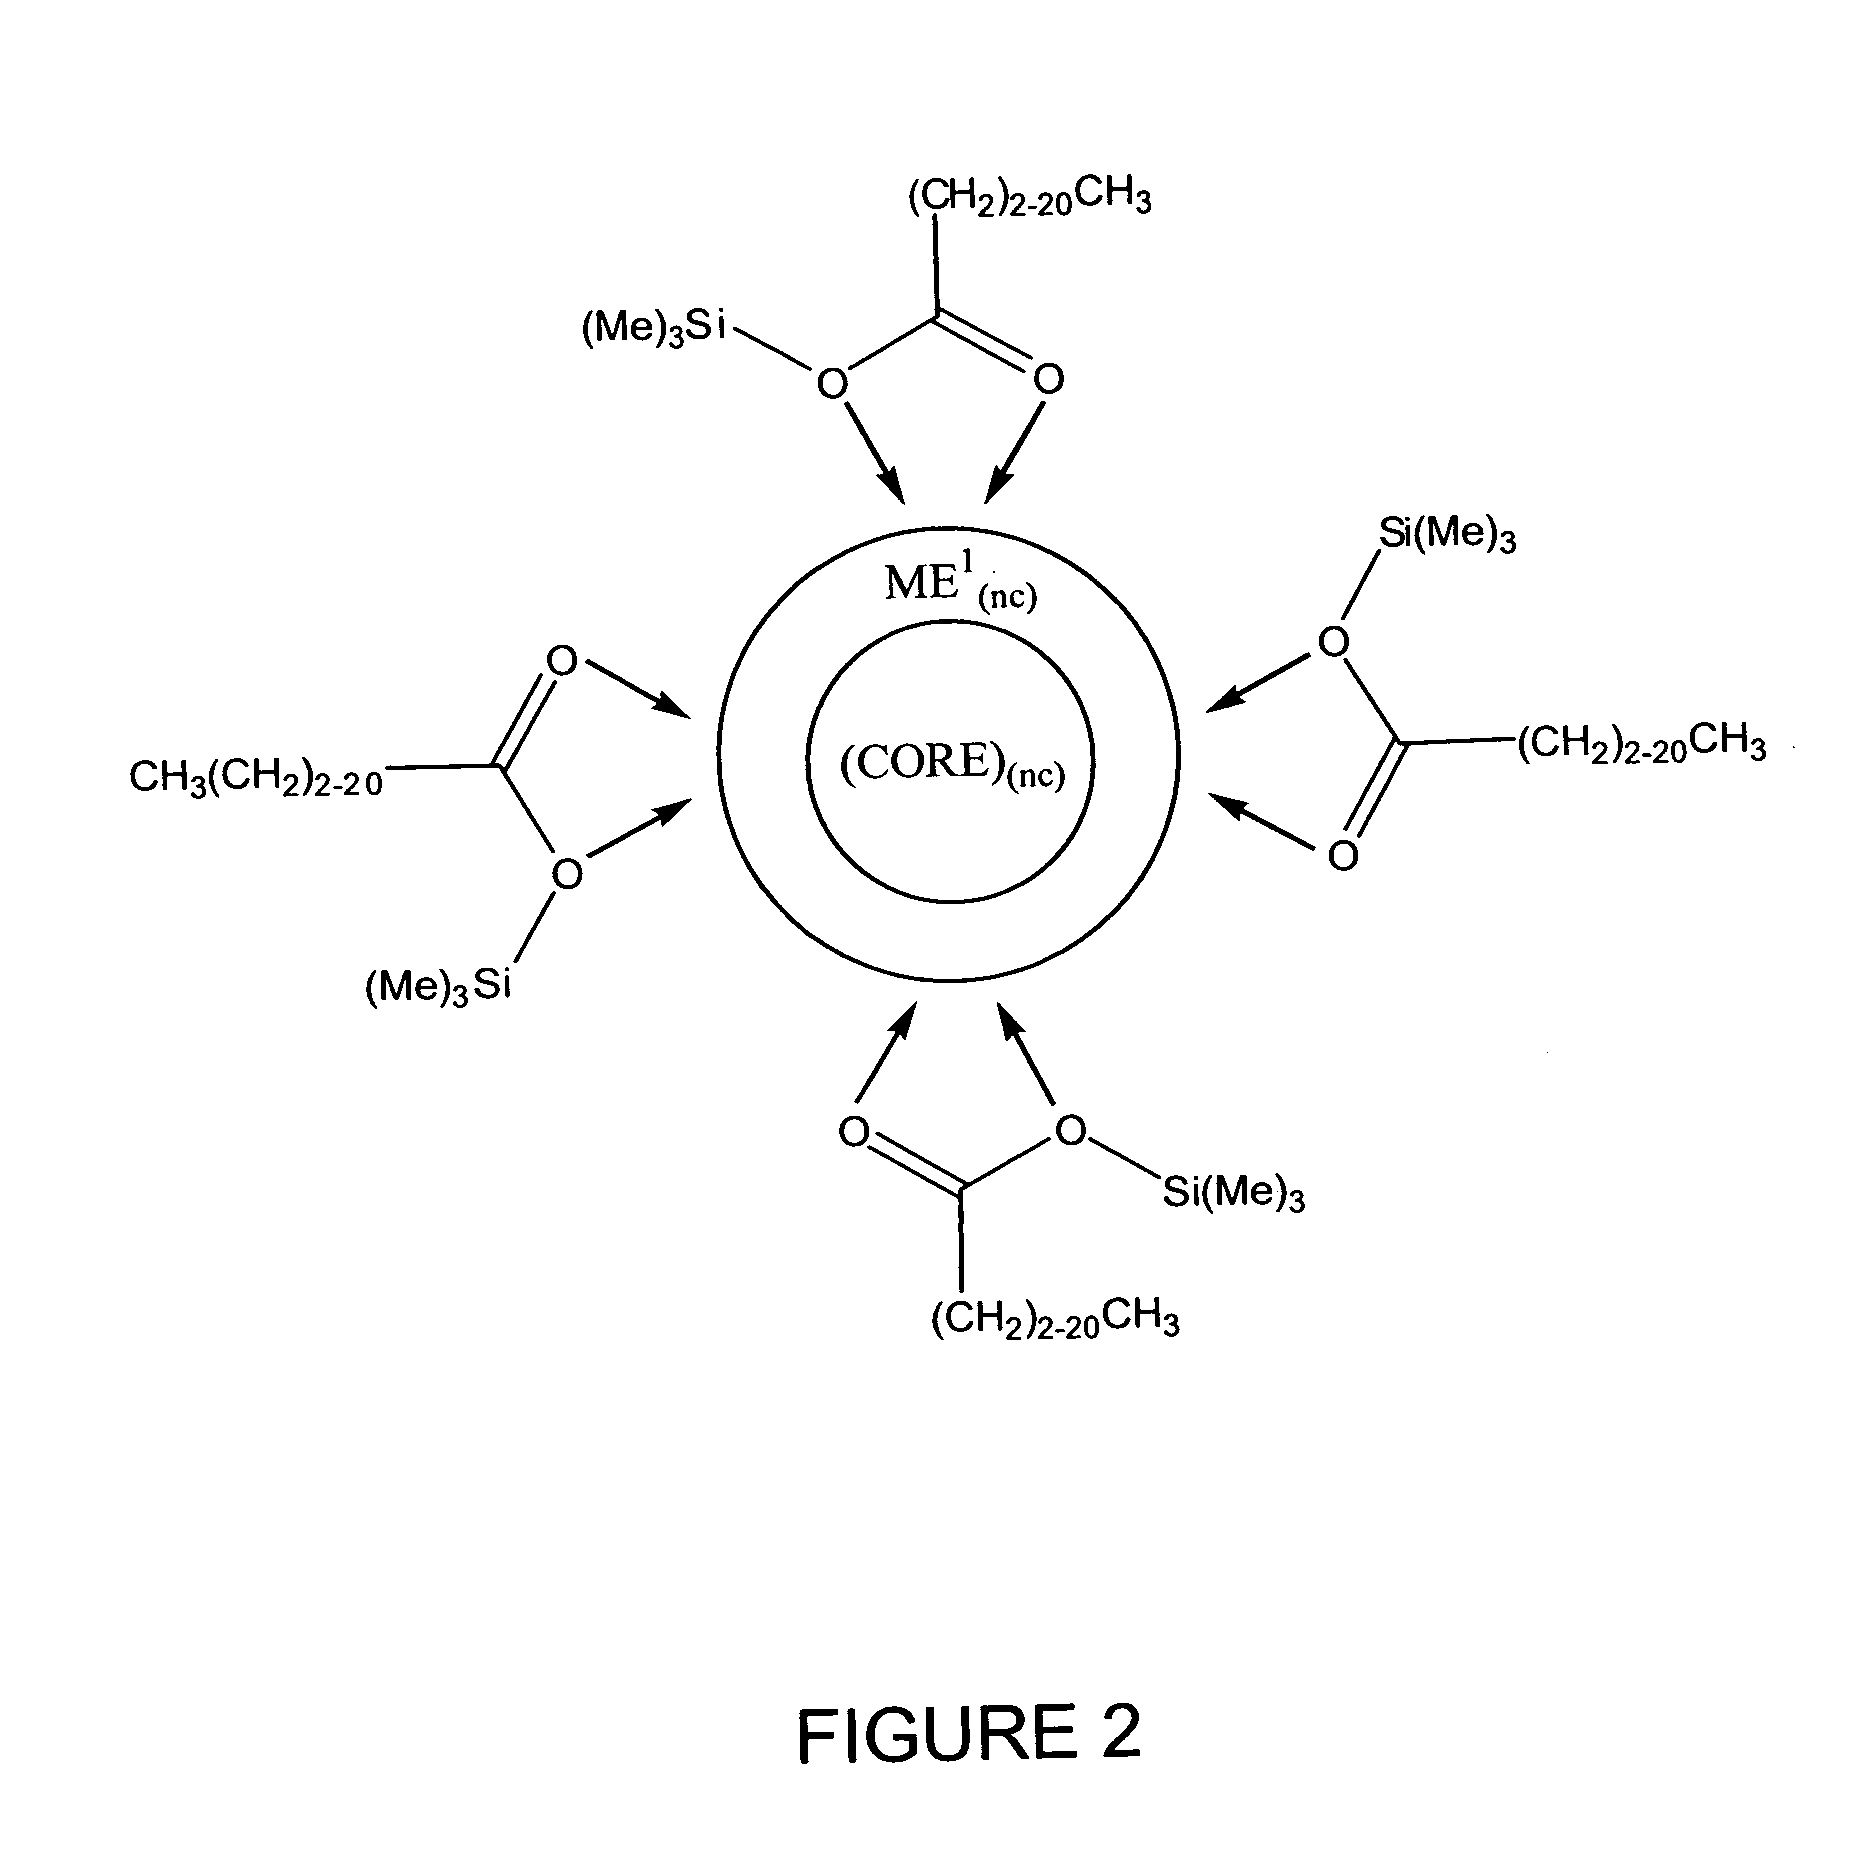 Process for producing semiconductor nanocrystal cores, core-shell, core-buffer-shell, and multiple layer systems in a non-coordinating solvent utilizing in situ surfactant generation